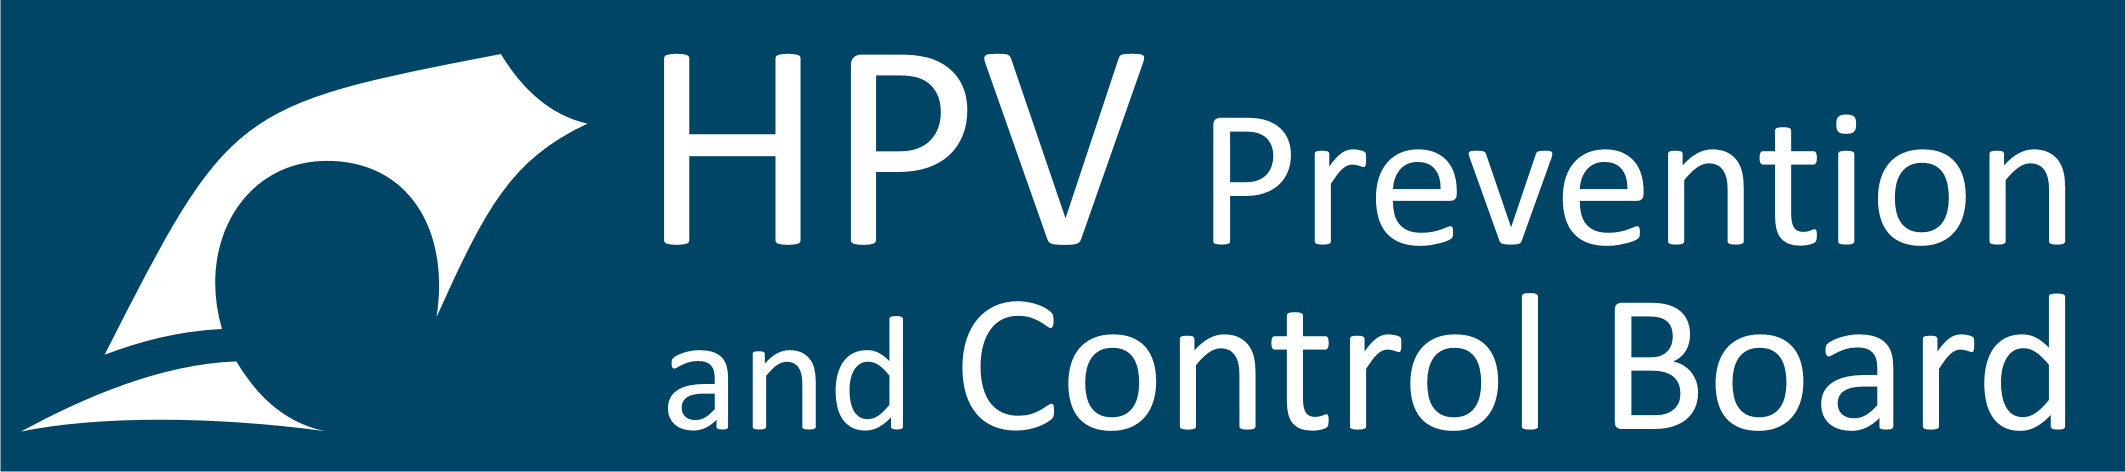 HPV Prevention & Control Board - University of Antwerp